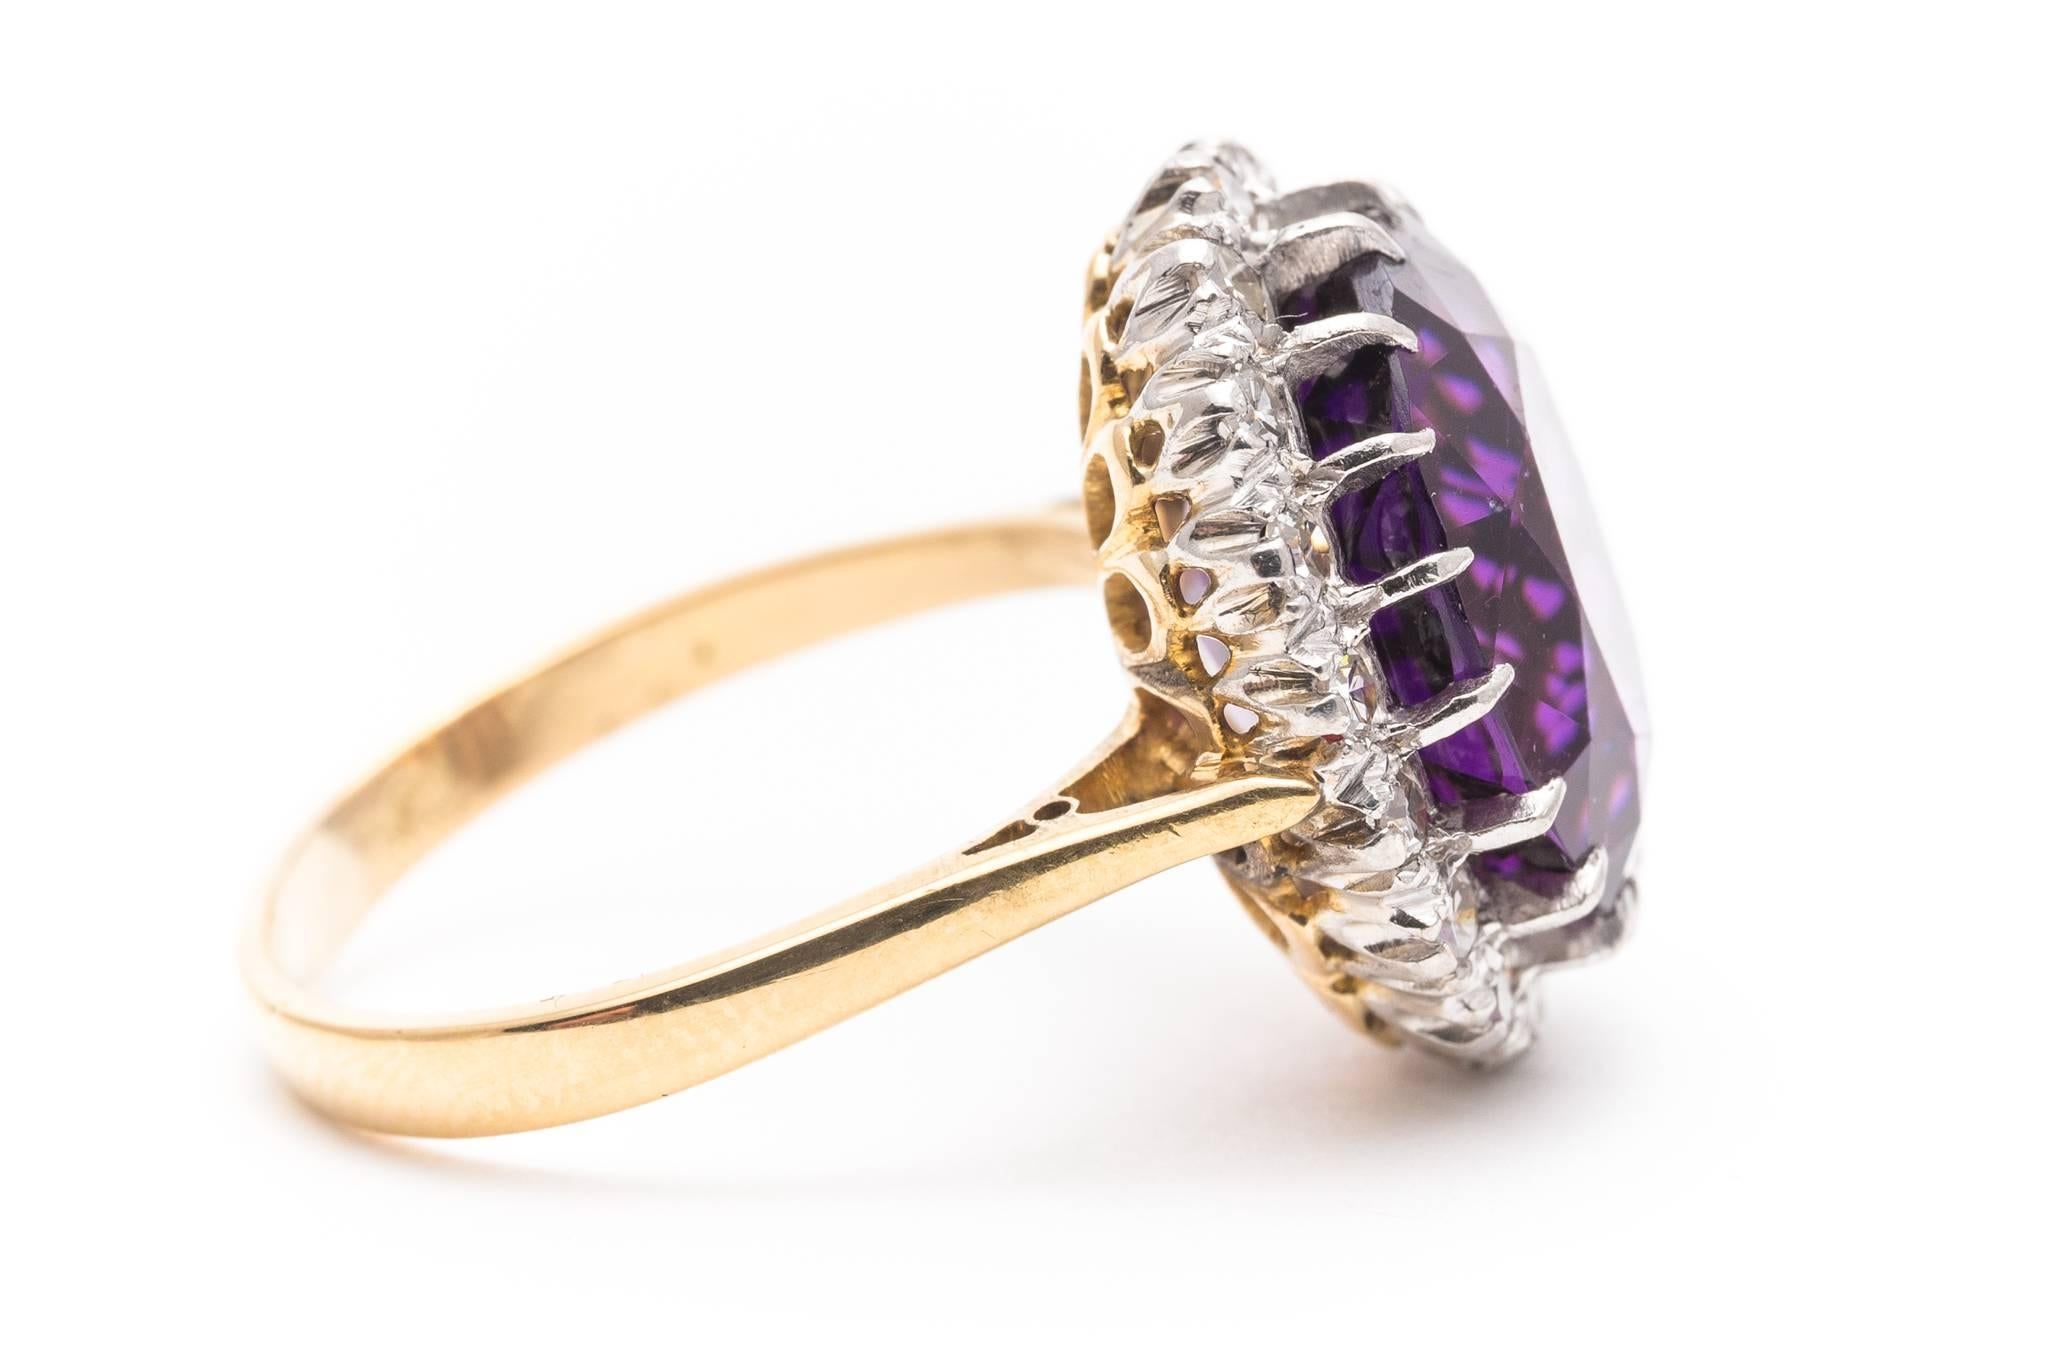 Women's Edwardian Period Amethyst Diamond Cluster Ring in Platinum and 18k